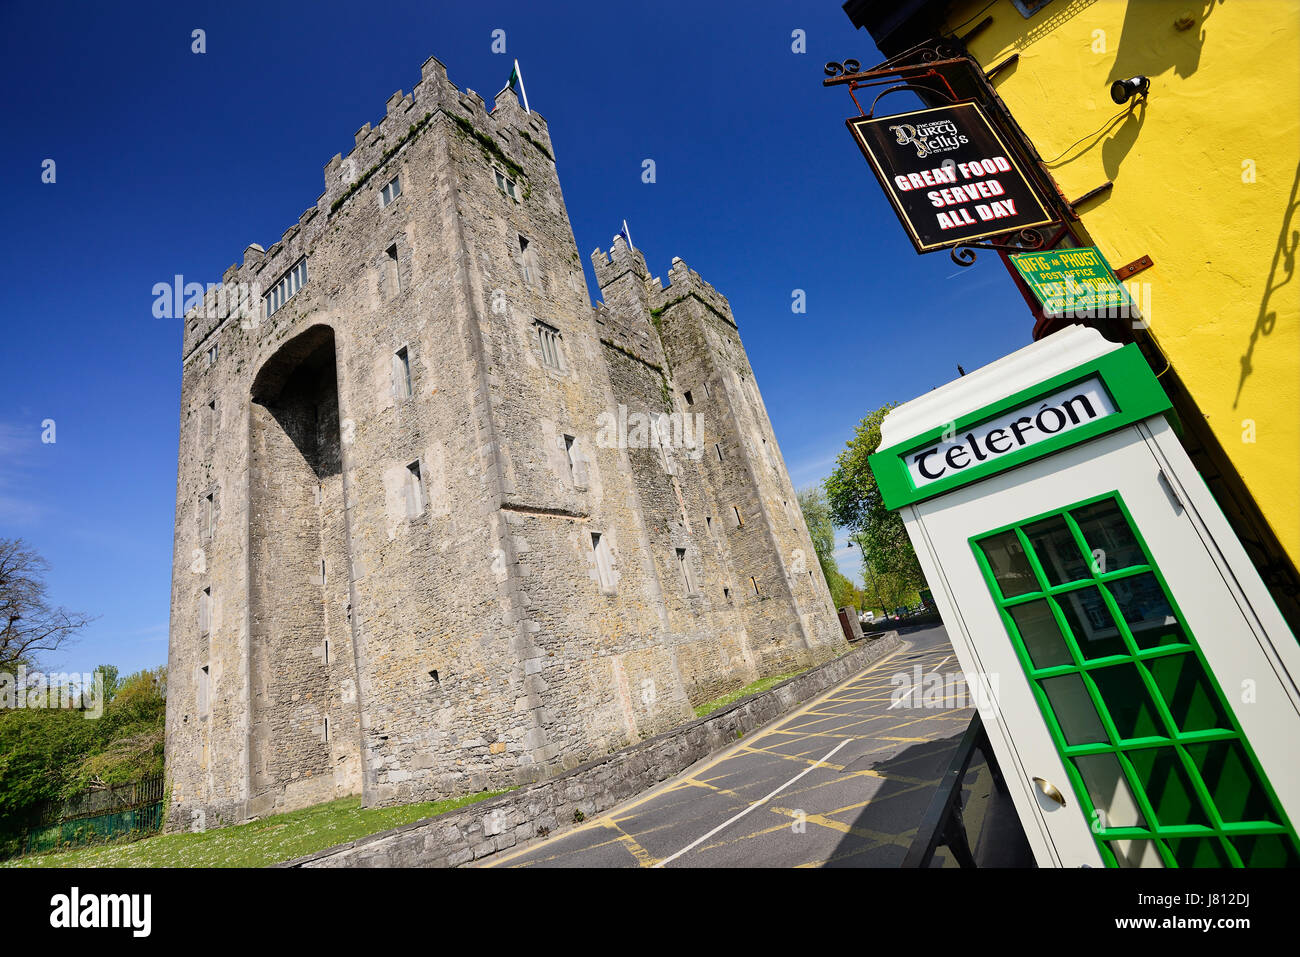 Ireland, County Clare, Bunratty Castle with traditional Irish telephone box nearby. Stock Photo